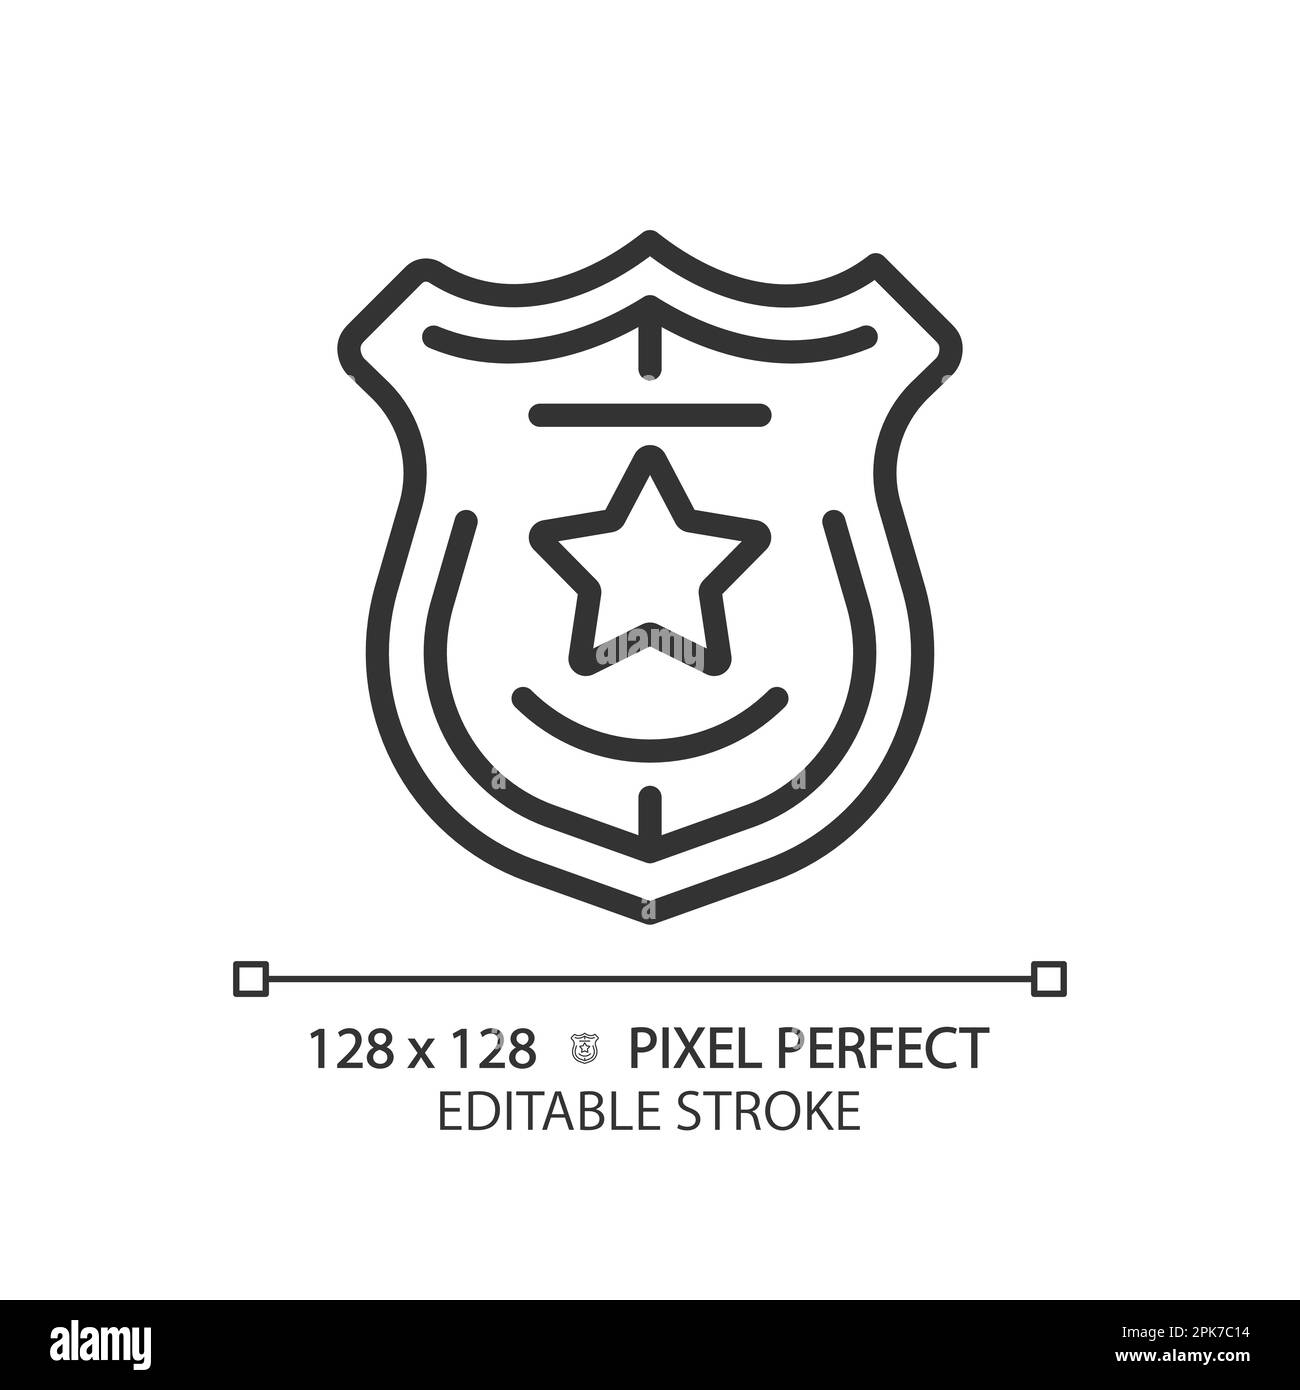 Law enforcement pixel perfect linear icon Stock Vector